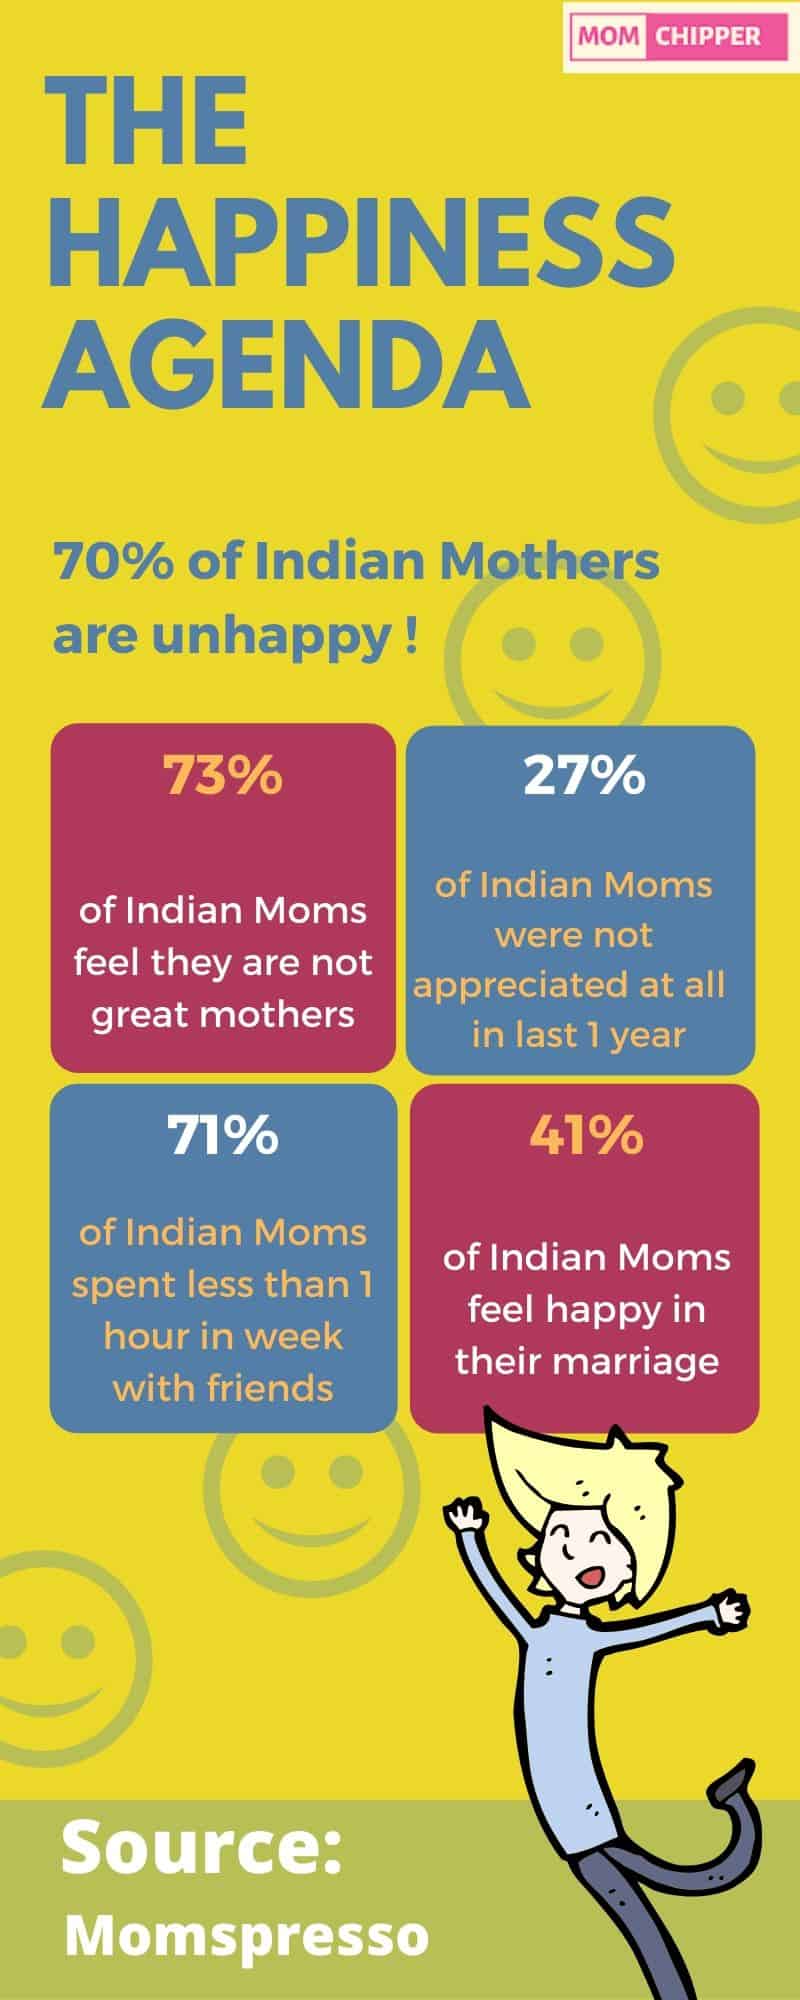 What makes indian Moms happy